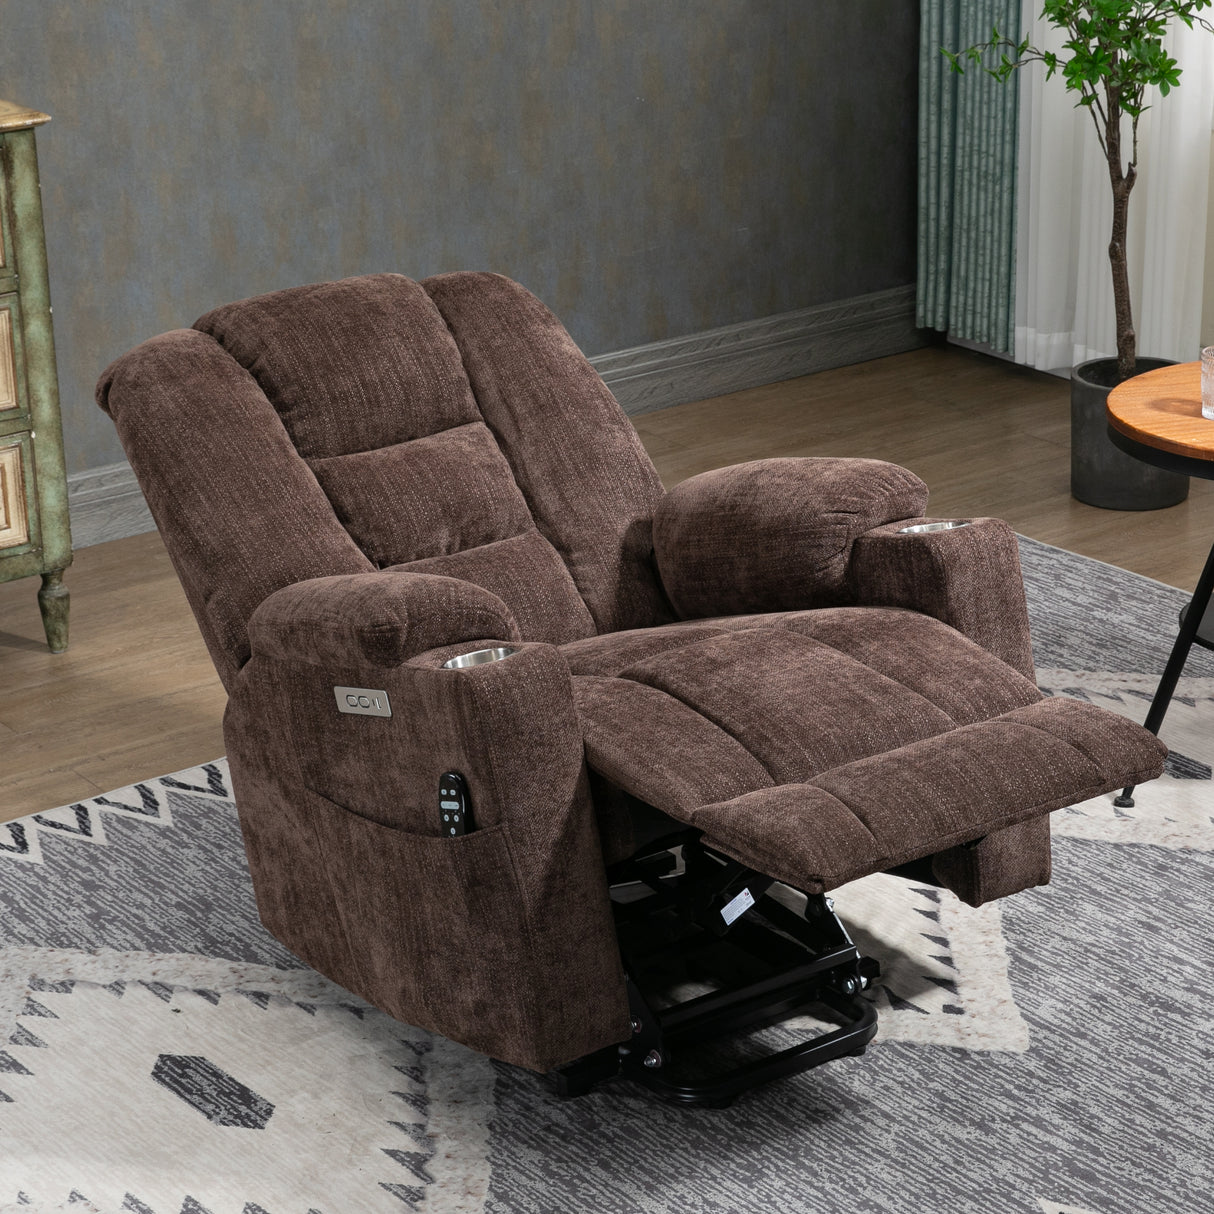 EMON'S Large Power Lift Recliner Chair with Massage and Heat for Elderly, Overstuffed Wide Recliners, Heavy Duty Motion Mechanism with USB and Type C Ports, 2 Steel Cup Holders, Brown Home Elegance USA